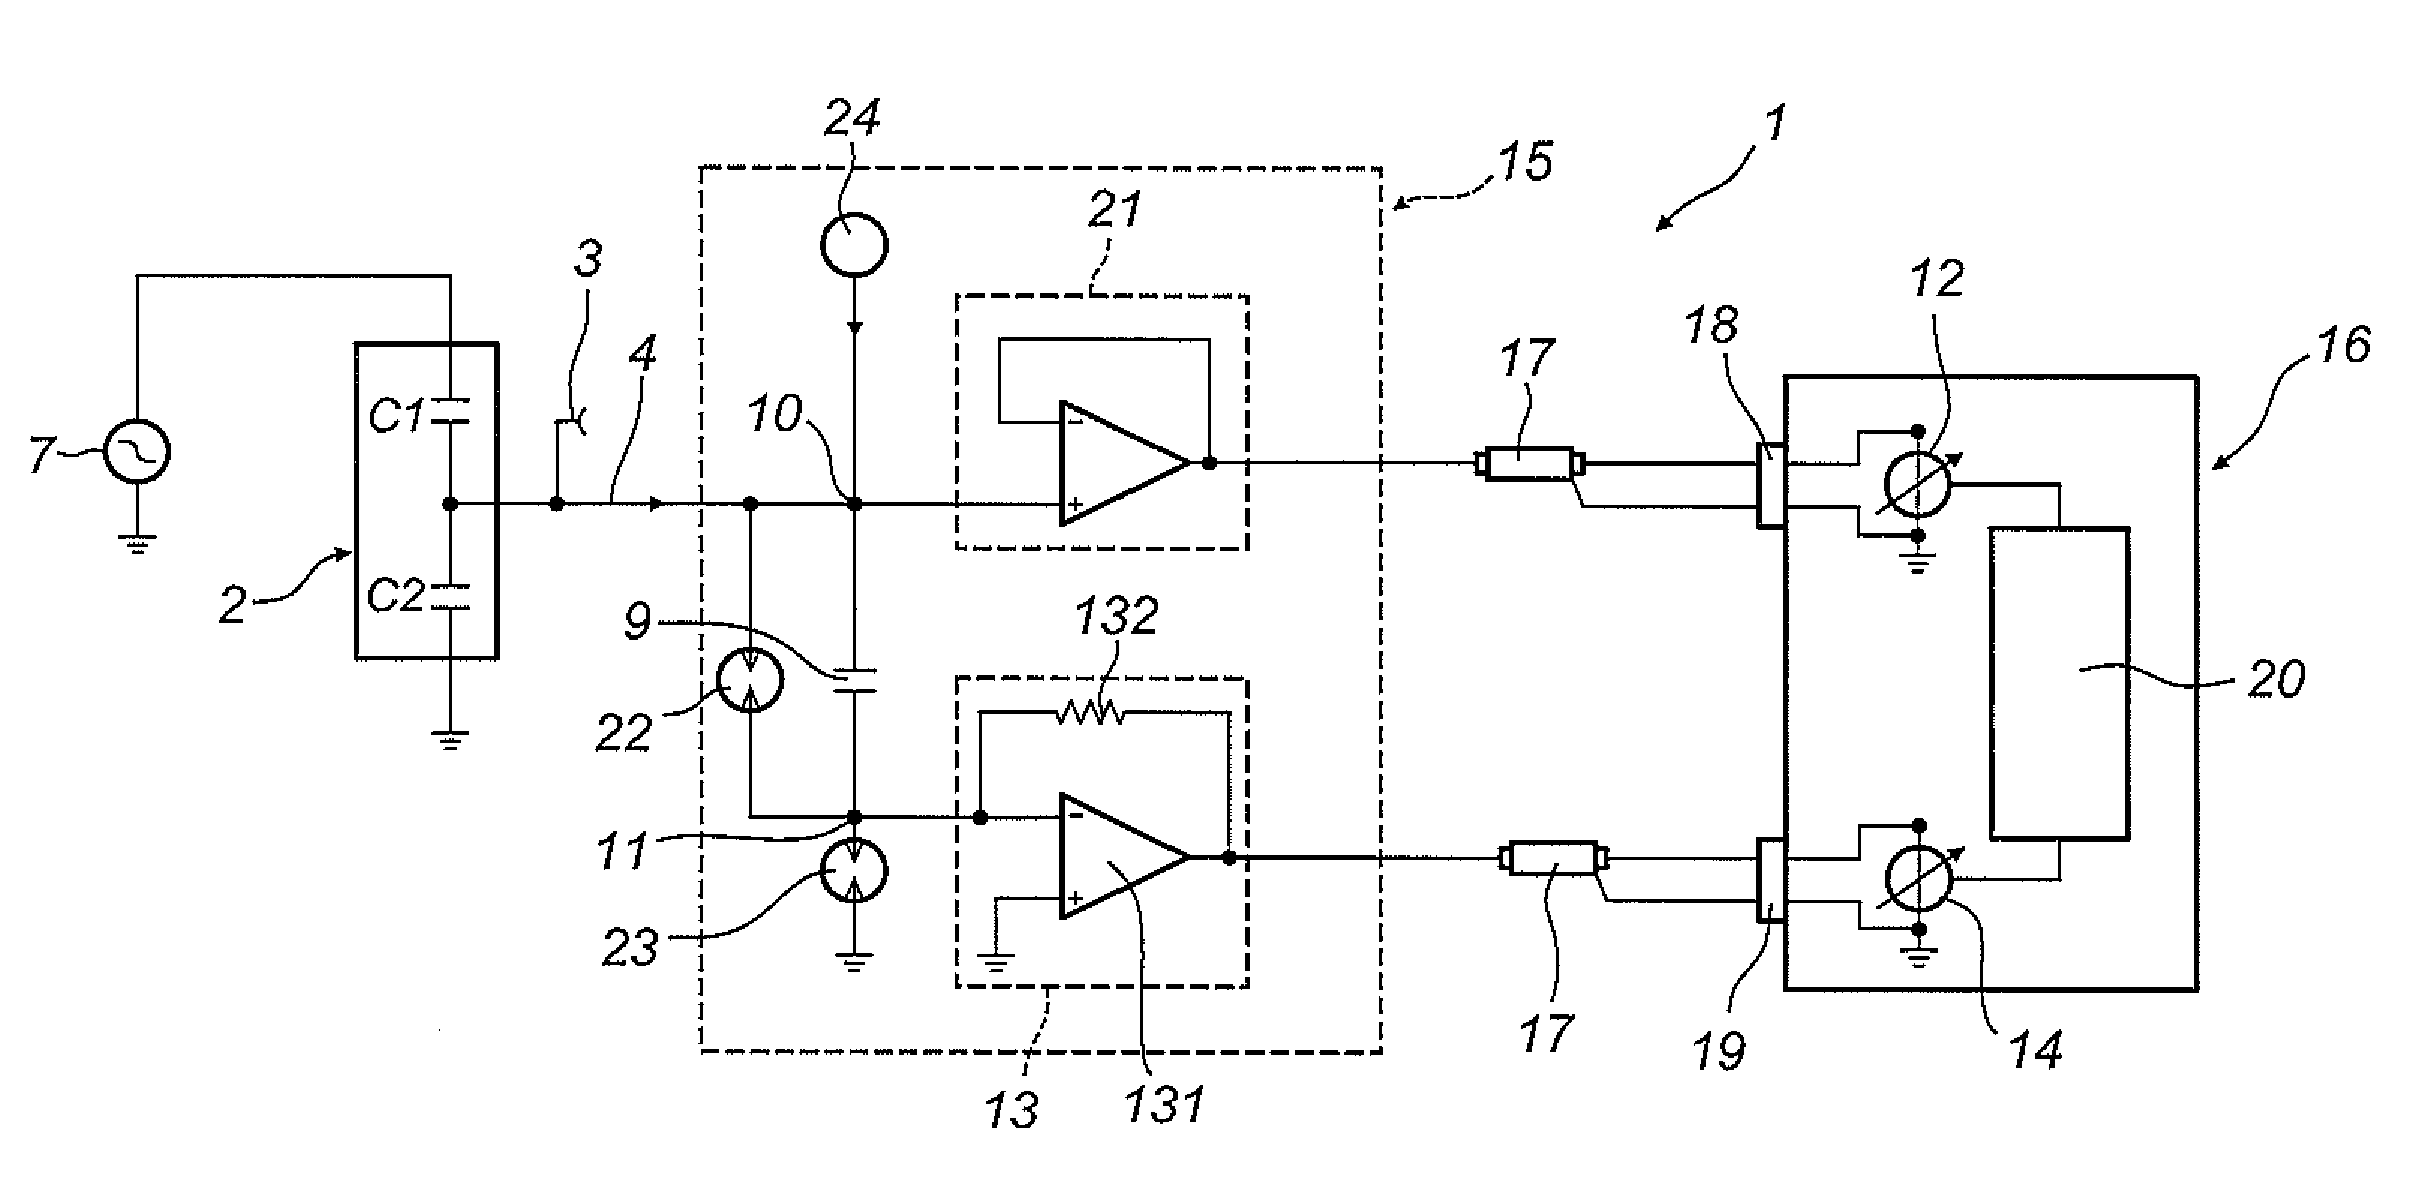 Apparatus and method for measuring the dissipation factor of an insulator